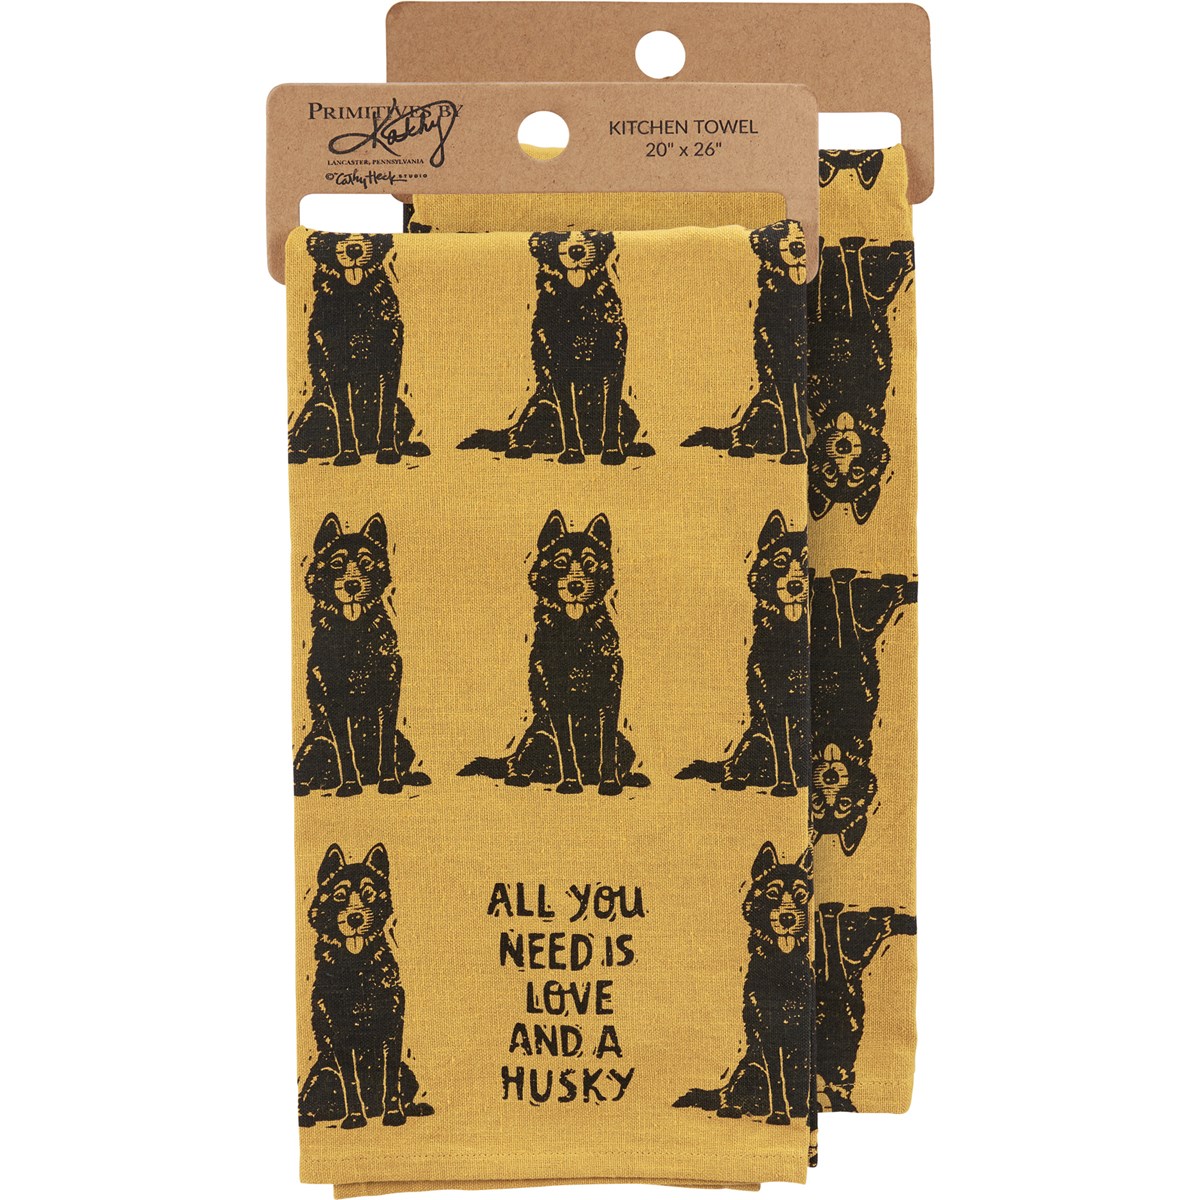 Love And A Husky Kitchen Towel - Cotton